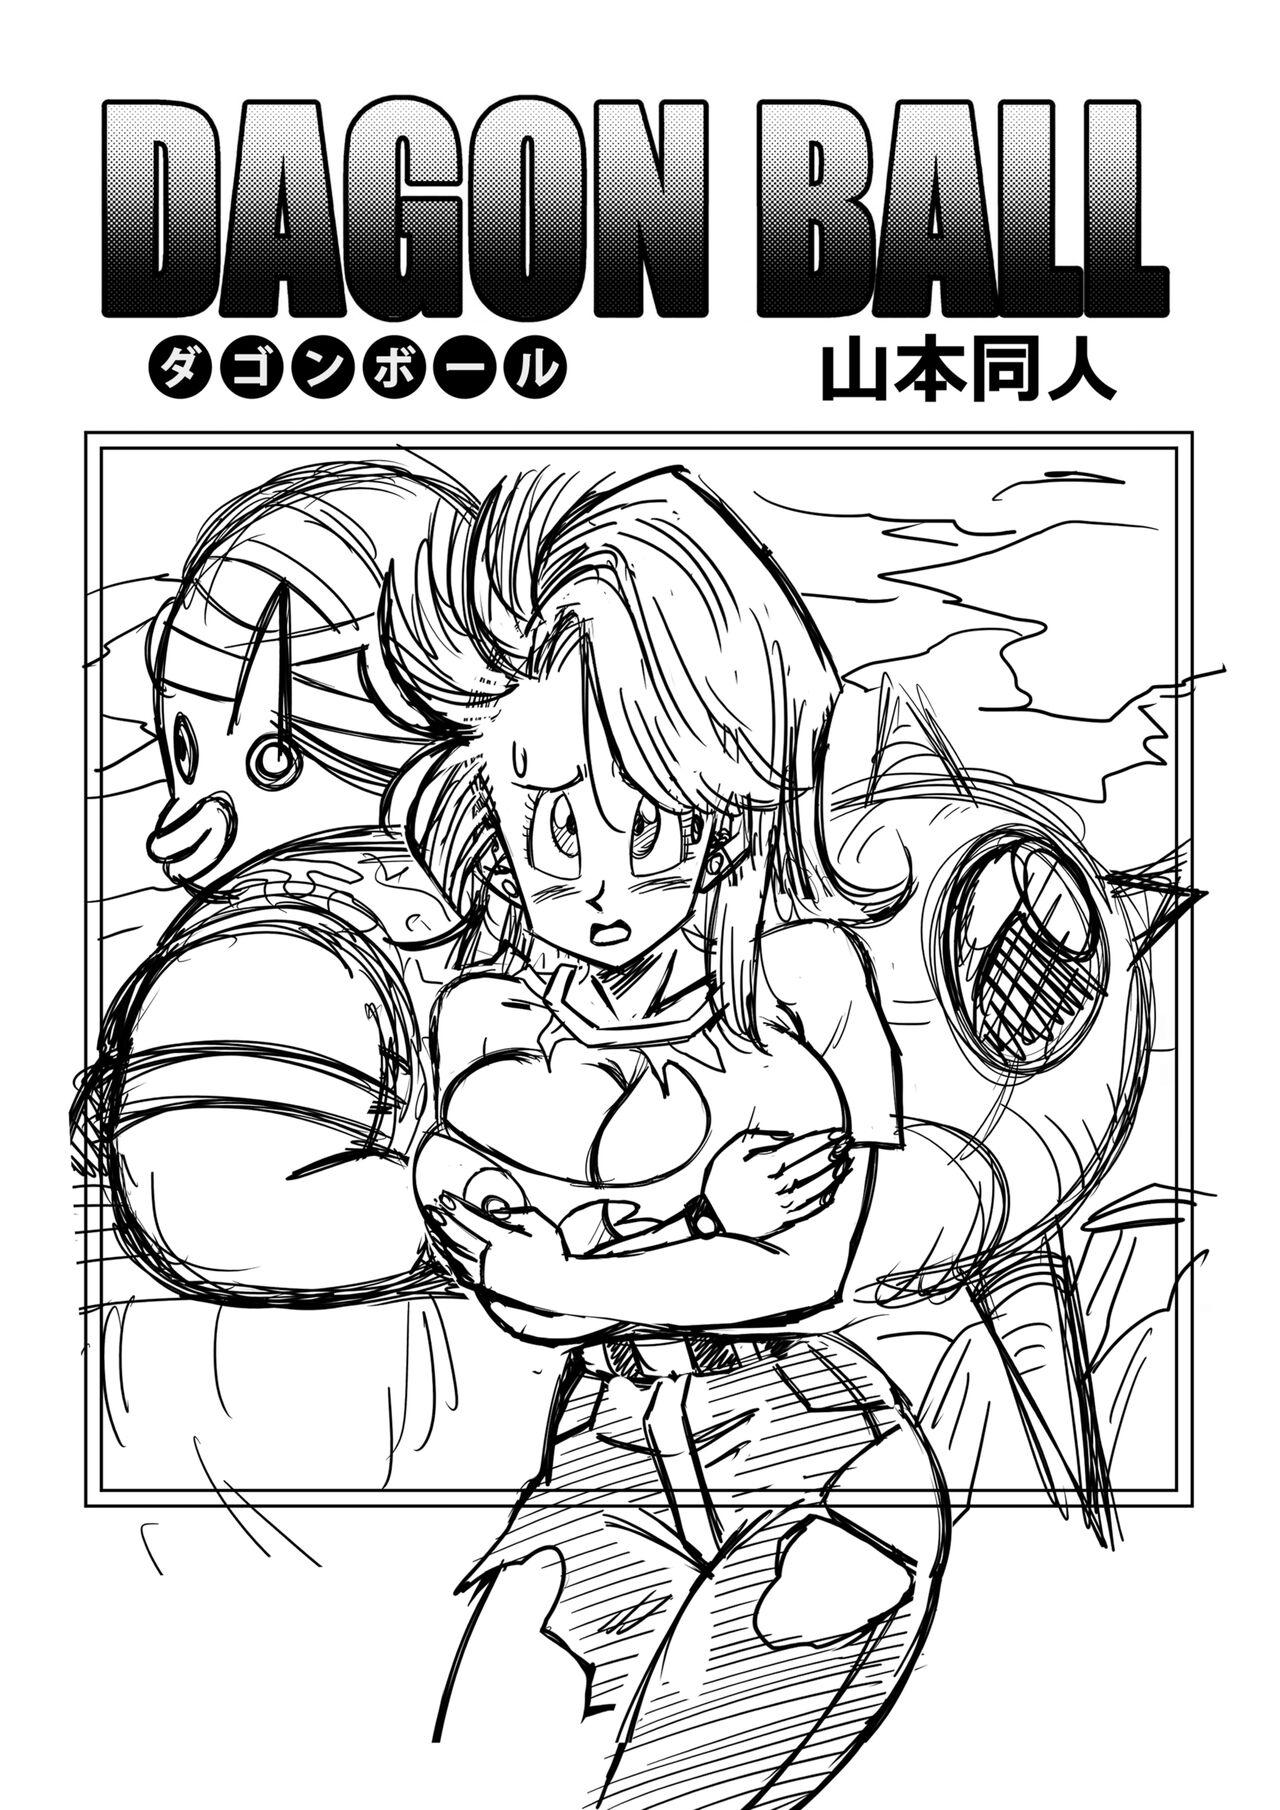 18 Porn Bulma Meets Mr.Popo - Sex inside the Mysterious Spaceship! - Dragon ball z Bigcock - Page 2